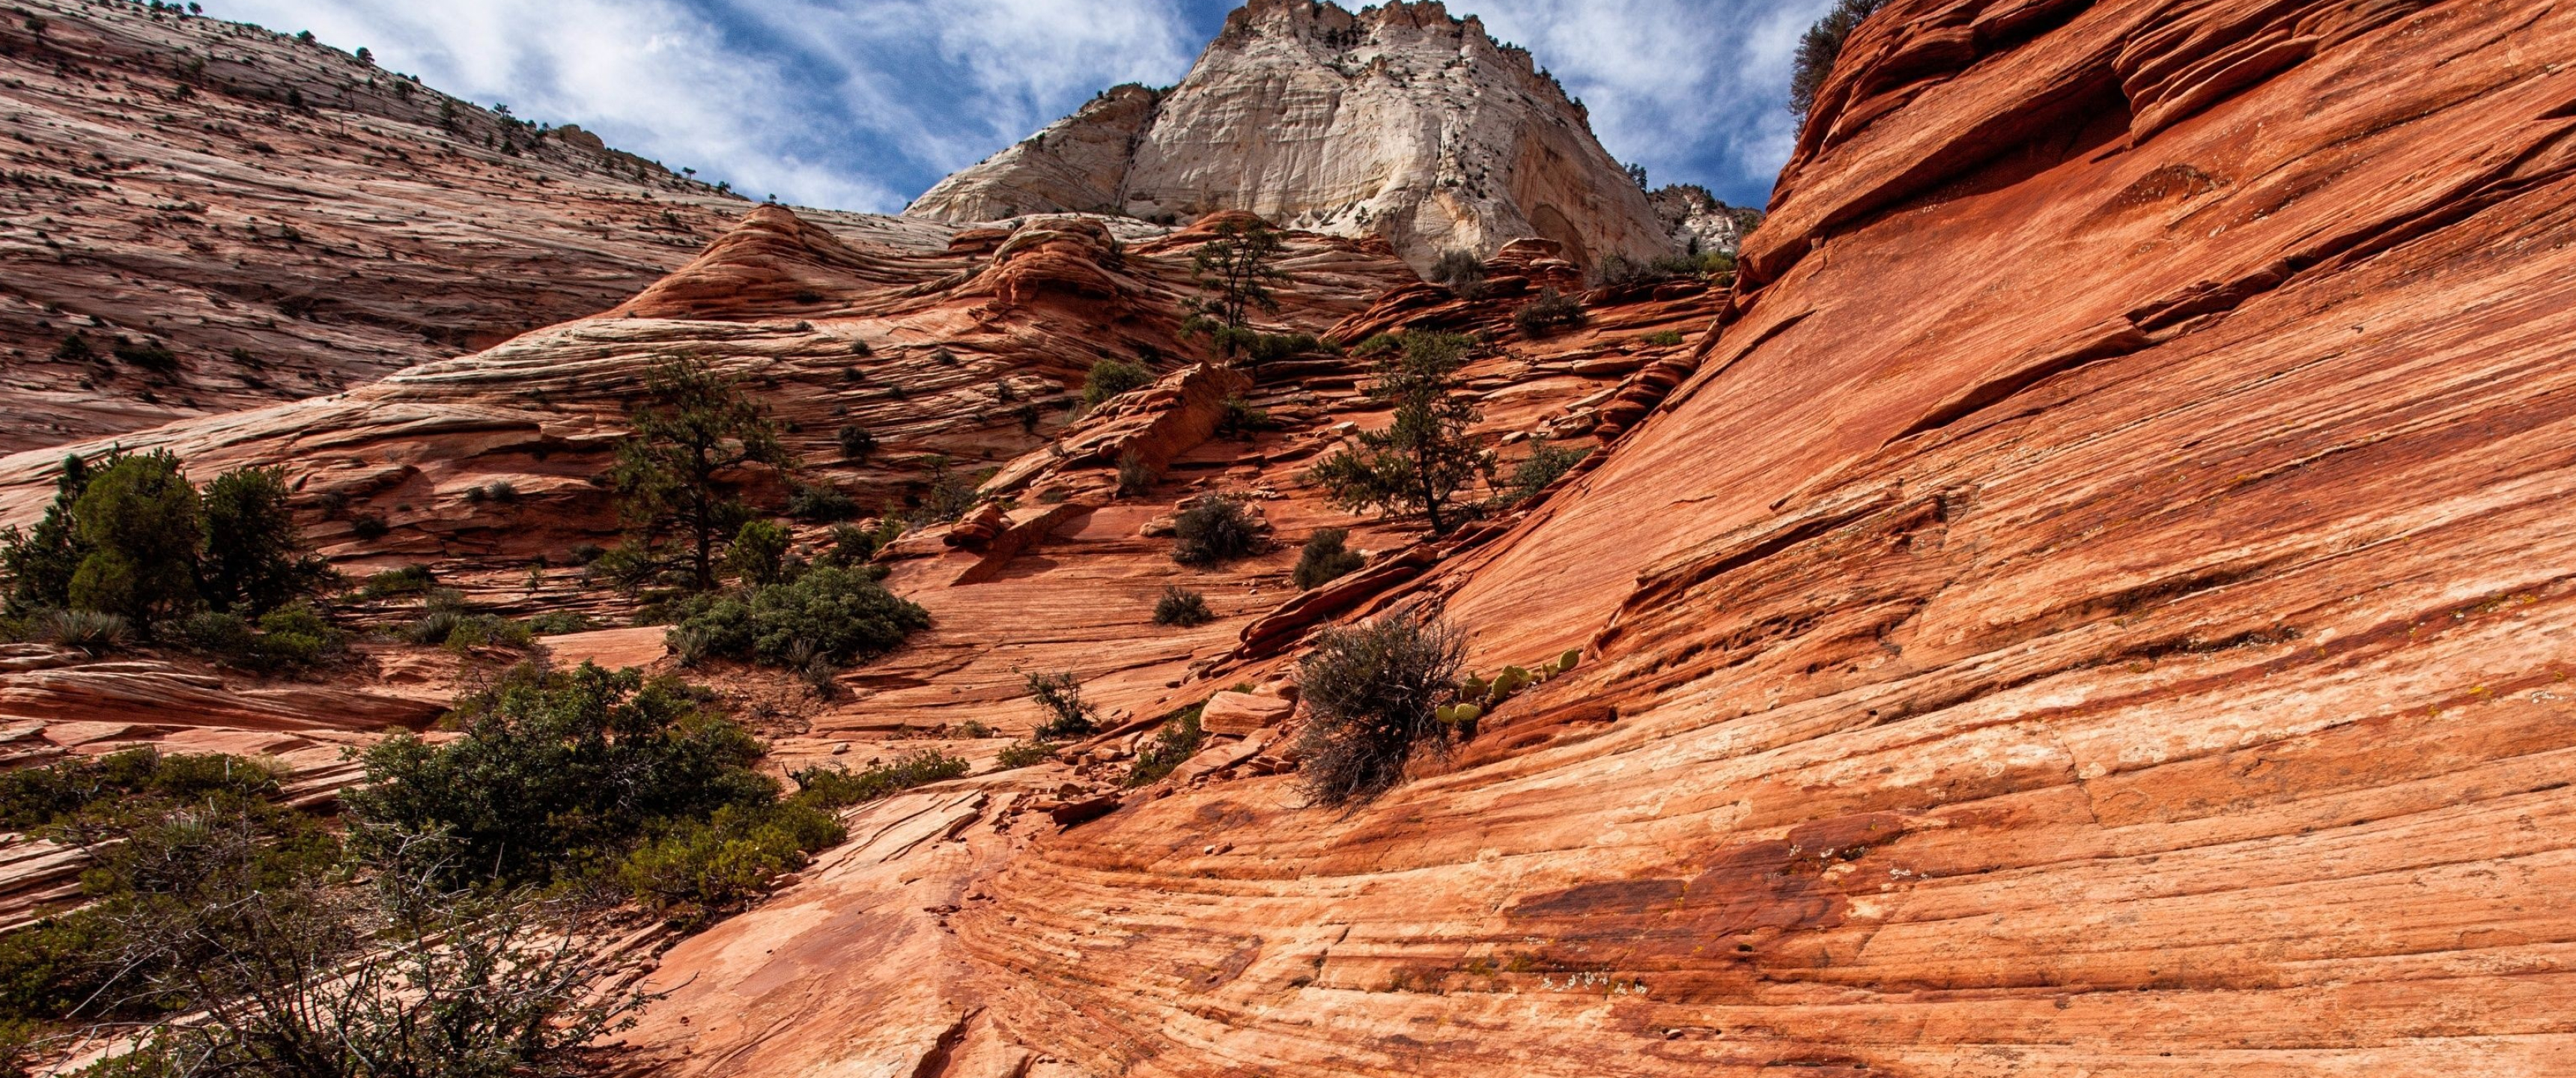 Zion National Park, Cool wallpapers, 2022's best, Zion in all its glory, 3440x1440 Dual Screen Desktop